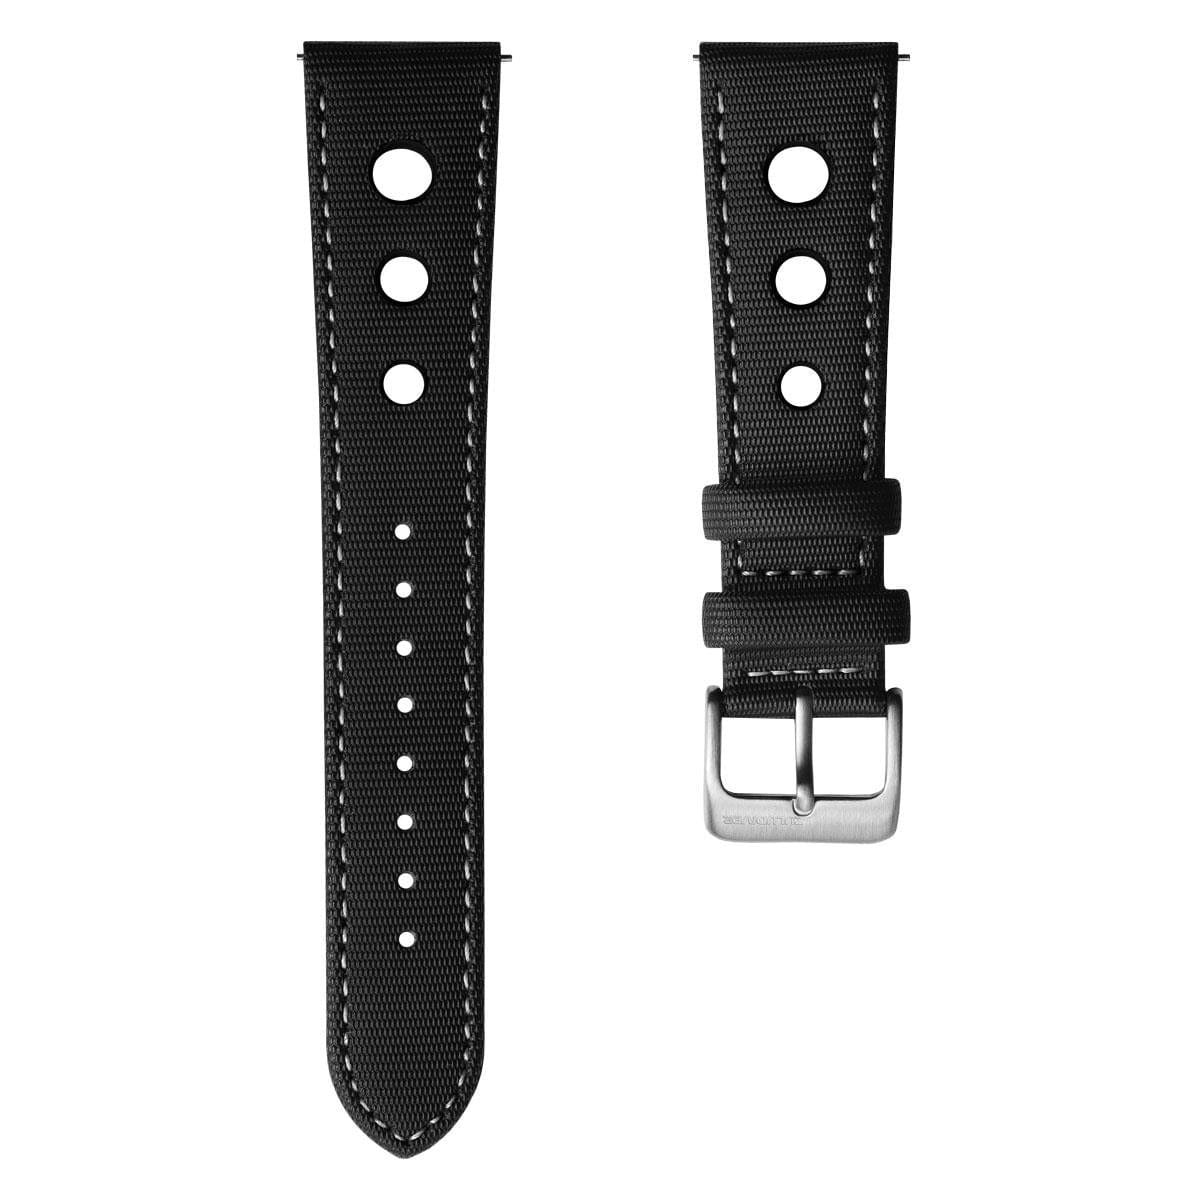 ZULUDIVER Mayday Anchor Sailcloth Divers Watch Strap - Off White Stitching